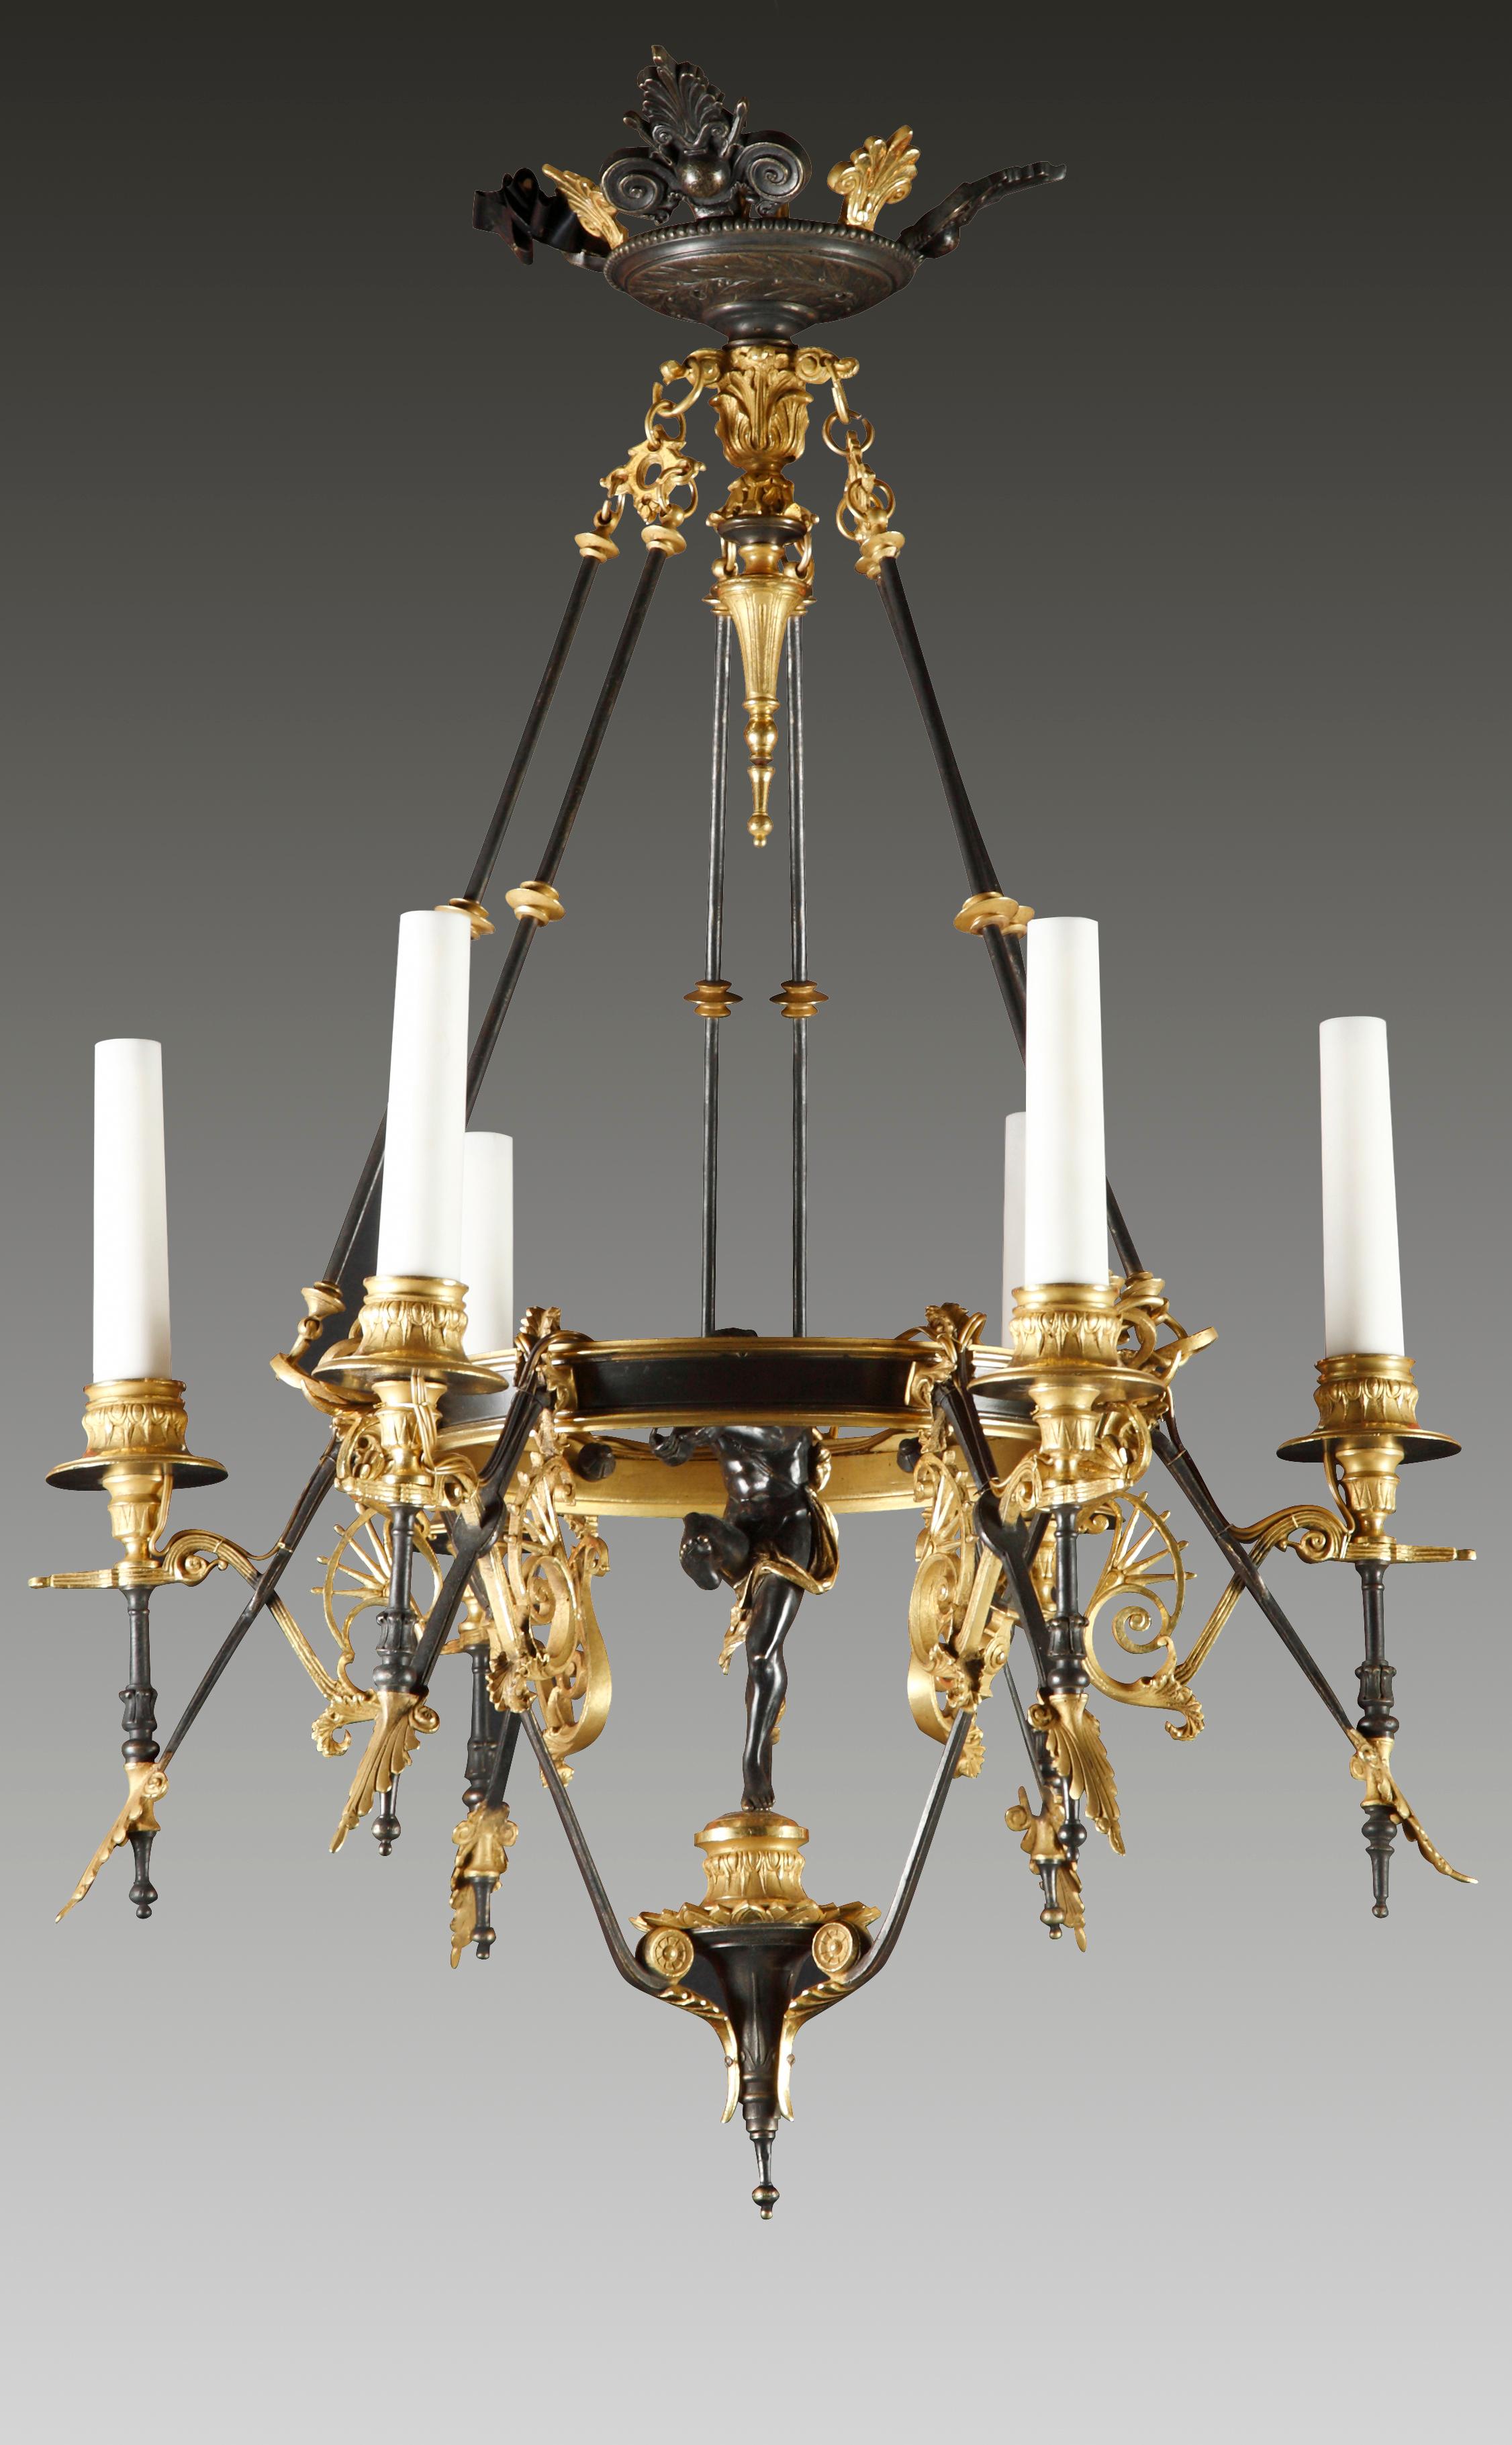 A six-light arms chandelier attributed to G. Servant, made in the Greek style, in patinated -and gilded bronze, presenting in the middle of which a male dancer.

Georges Emile Henri Servant (1828-c.1890), who took over his father in 1855 at their